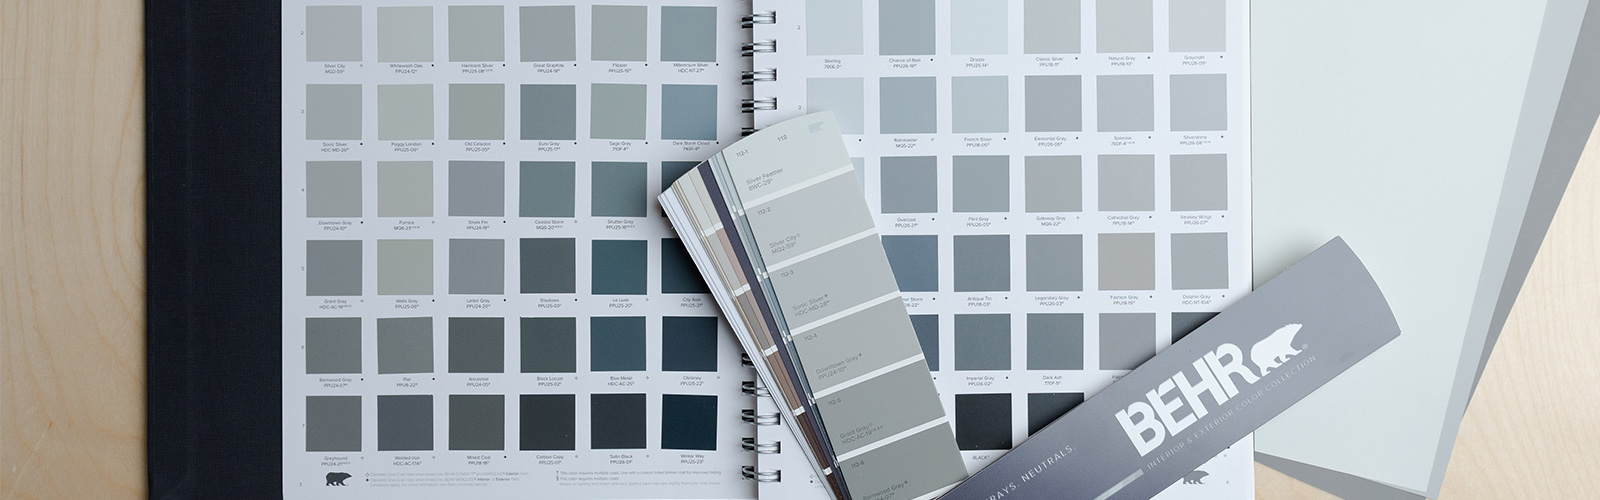 A large image of a BEHR Color Fan Deck with color book.